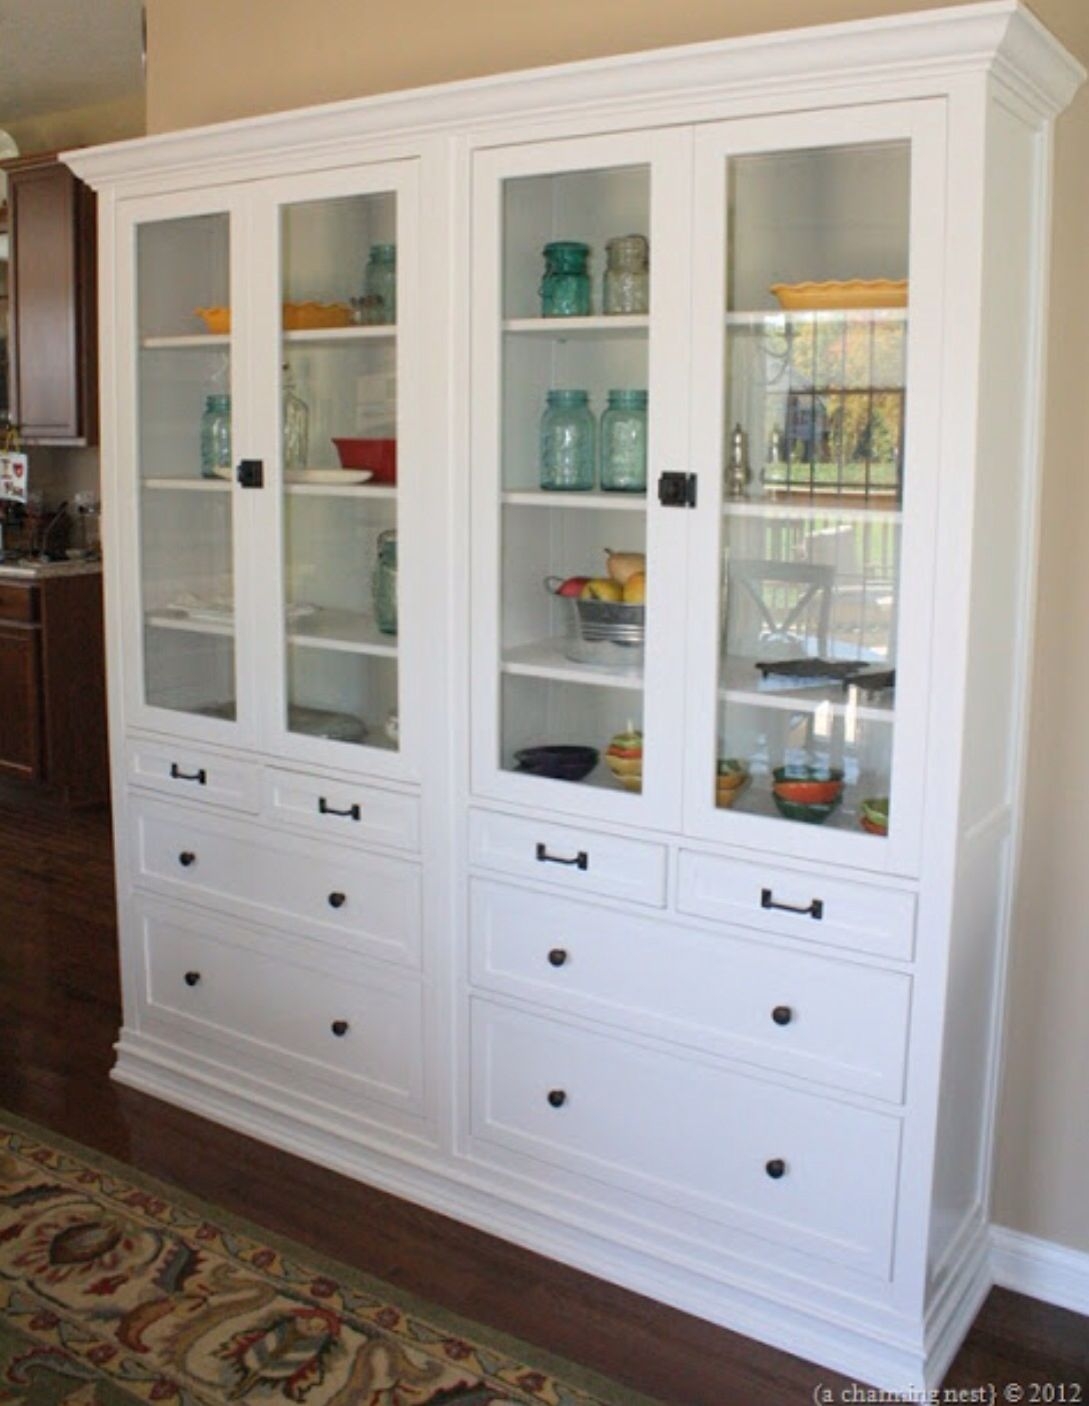 Two ikea units made into one custom cabinet they connected